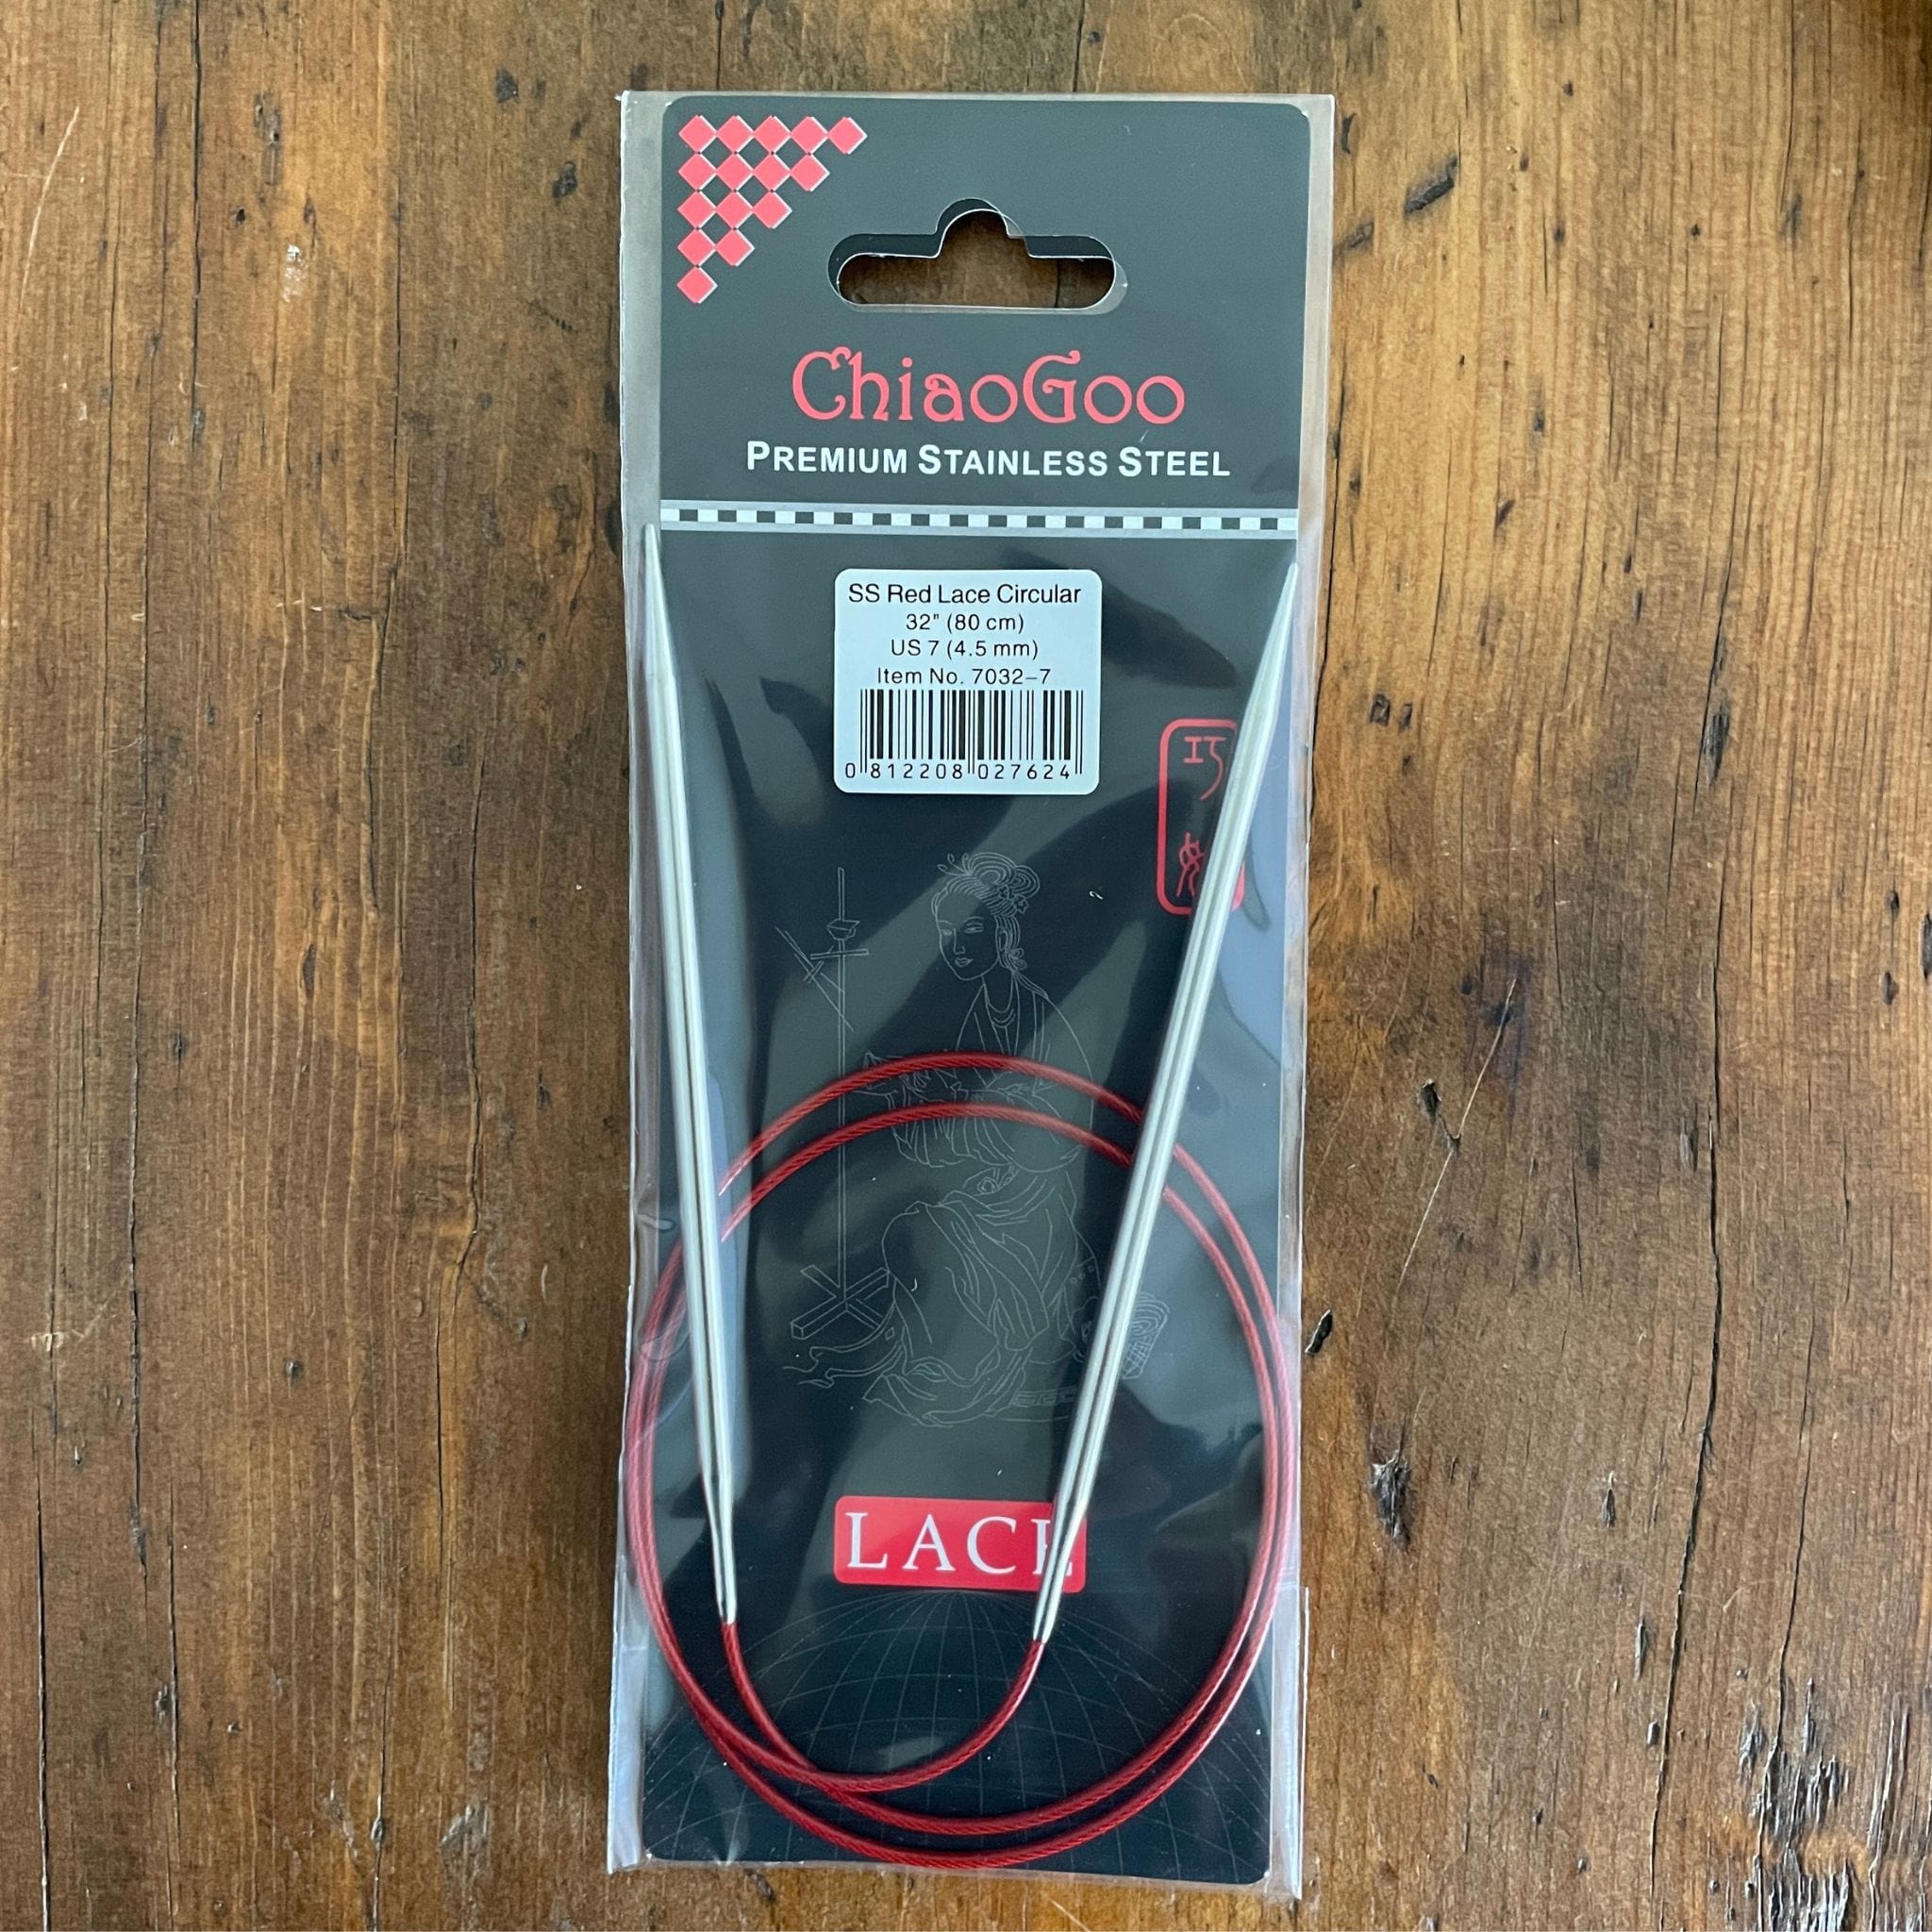 Chiaogoo Red Lace Stainless Circular Knitting Needles 32-size 7